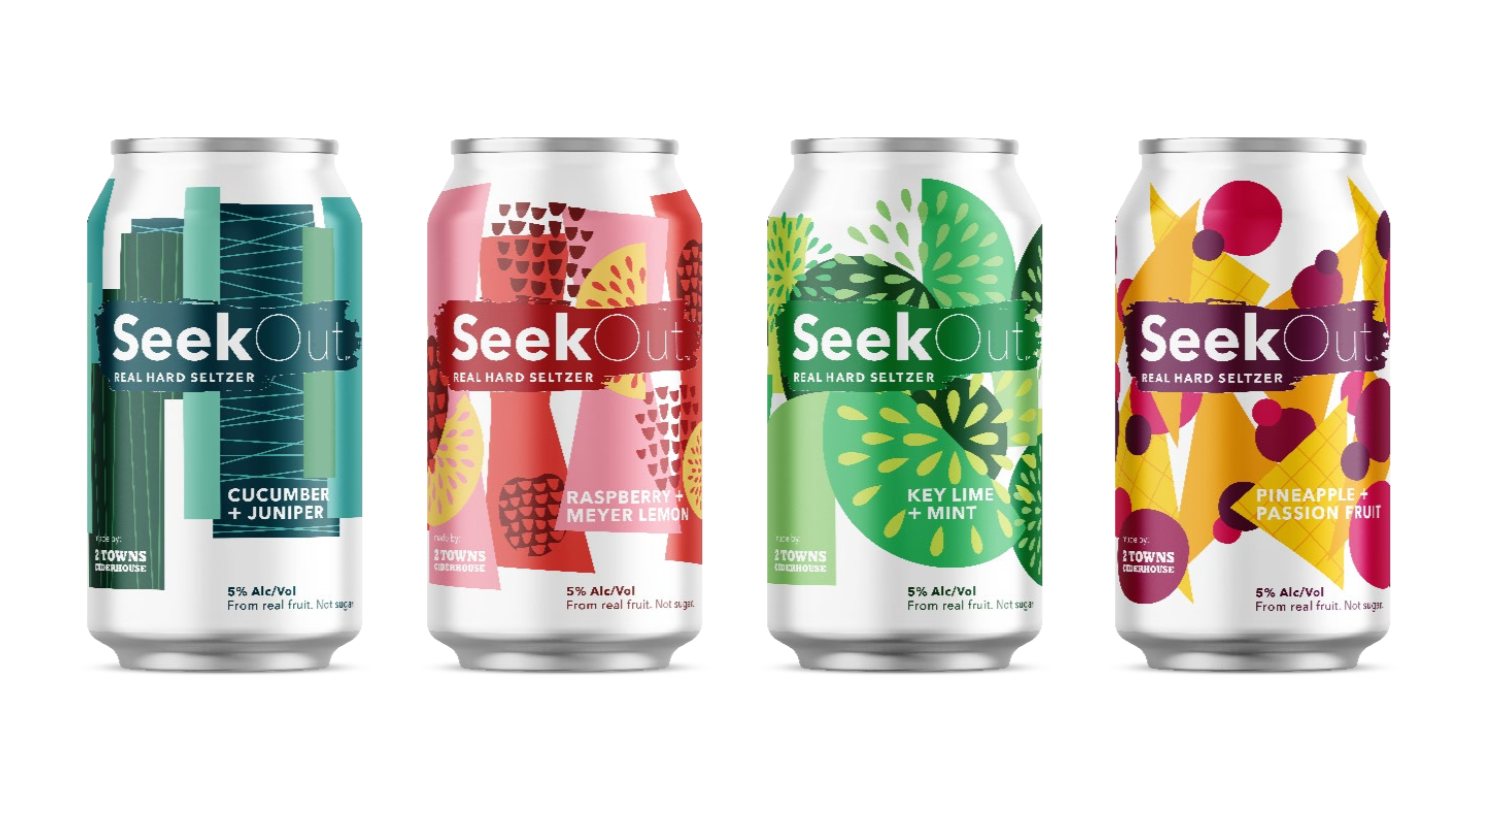 SeekOut Real Hard Seltzer by 2 Towns Ciderhouse